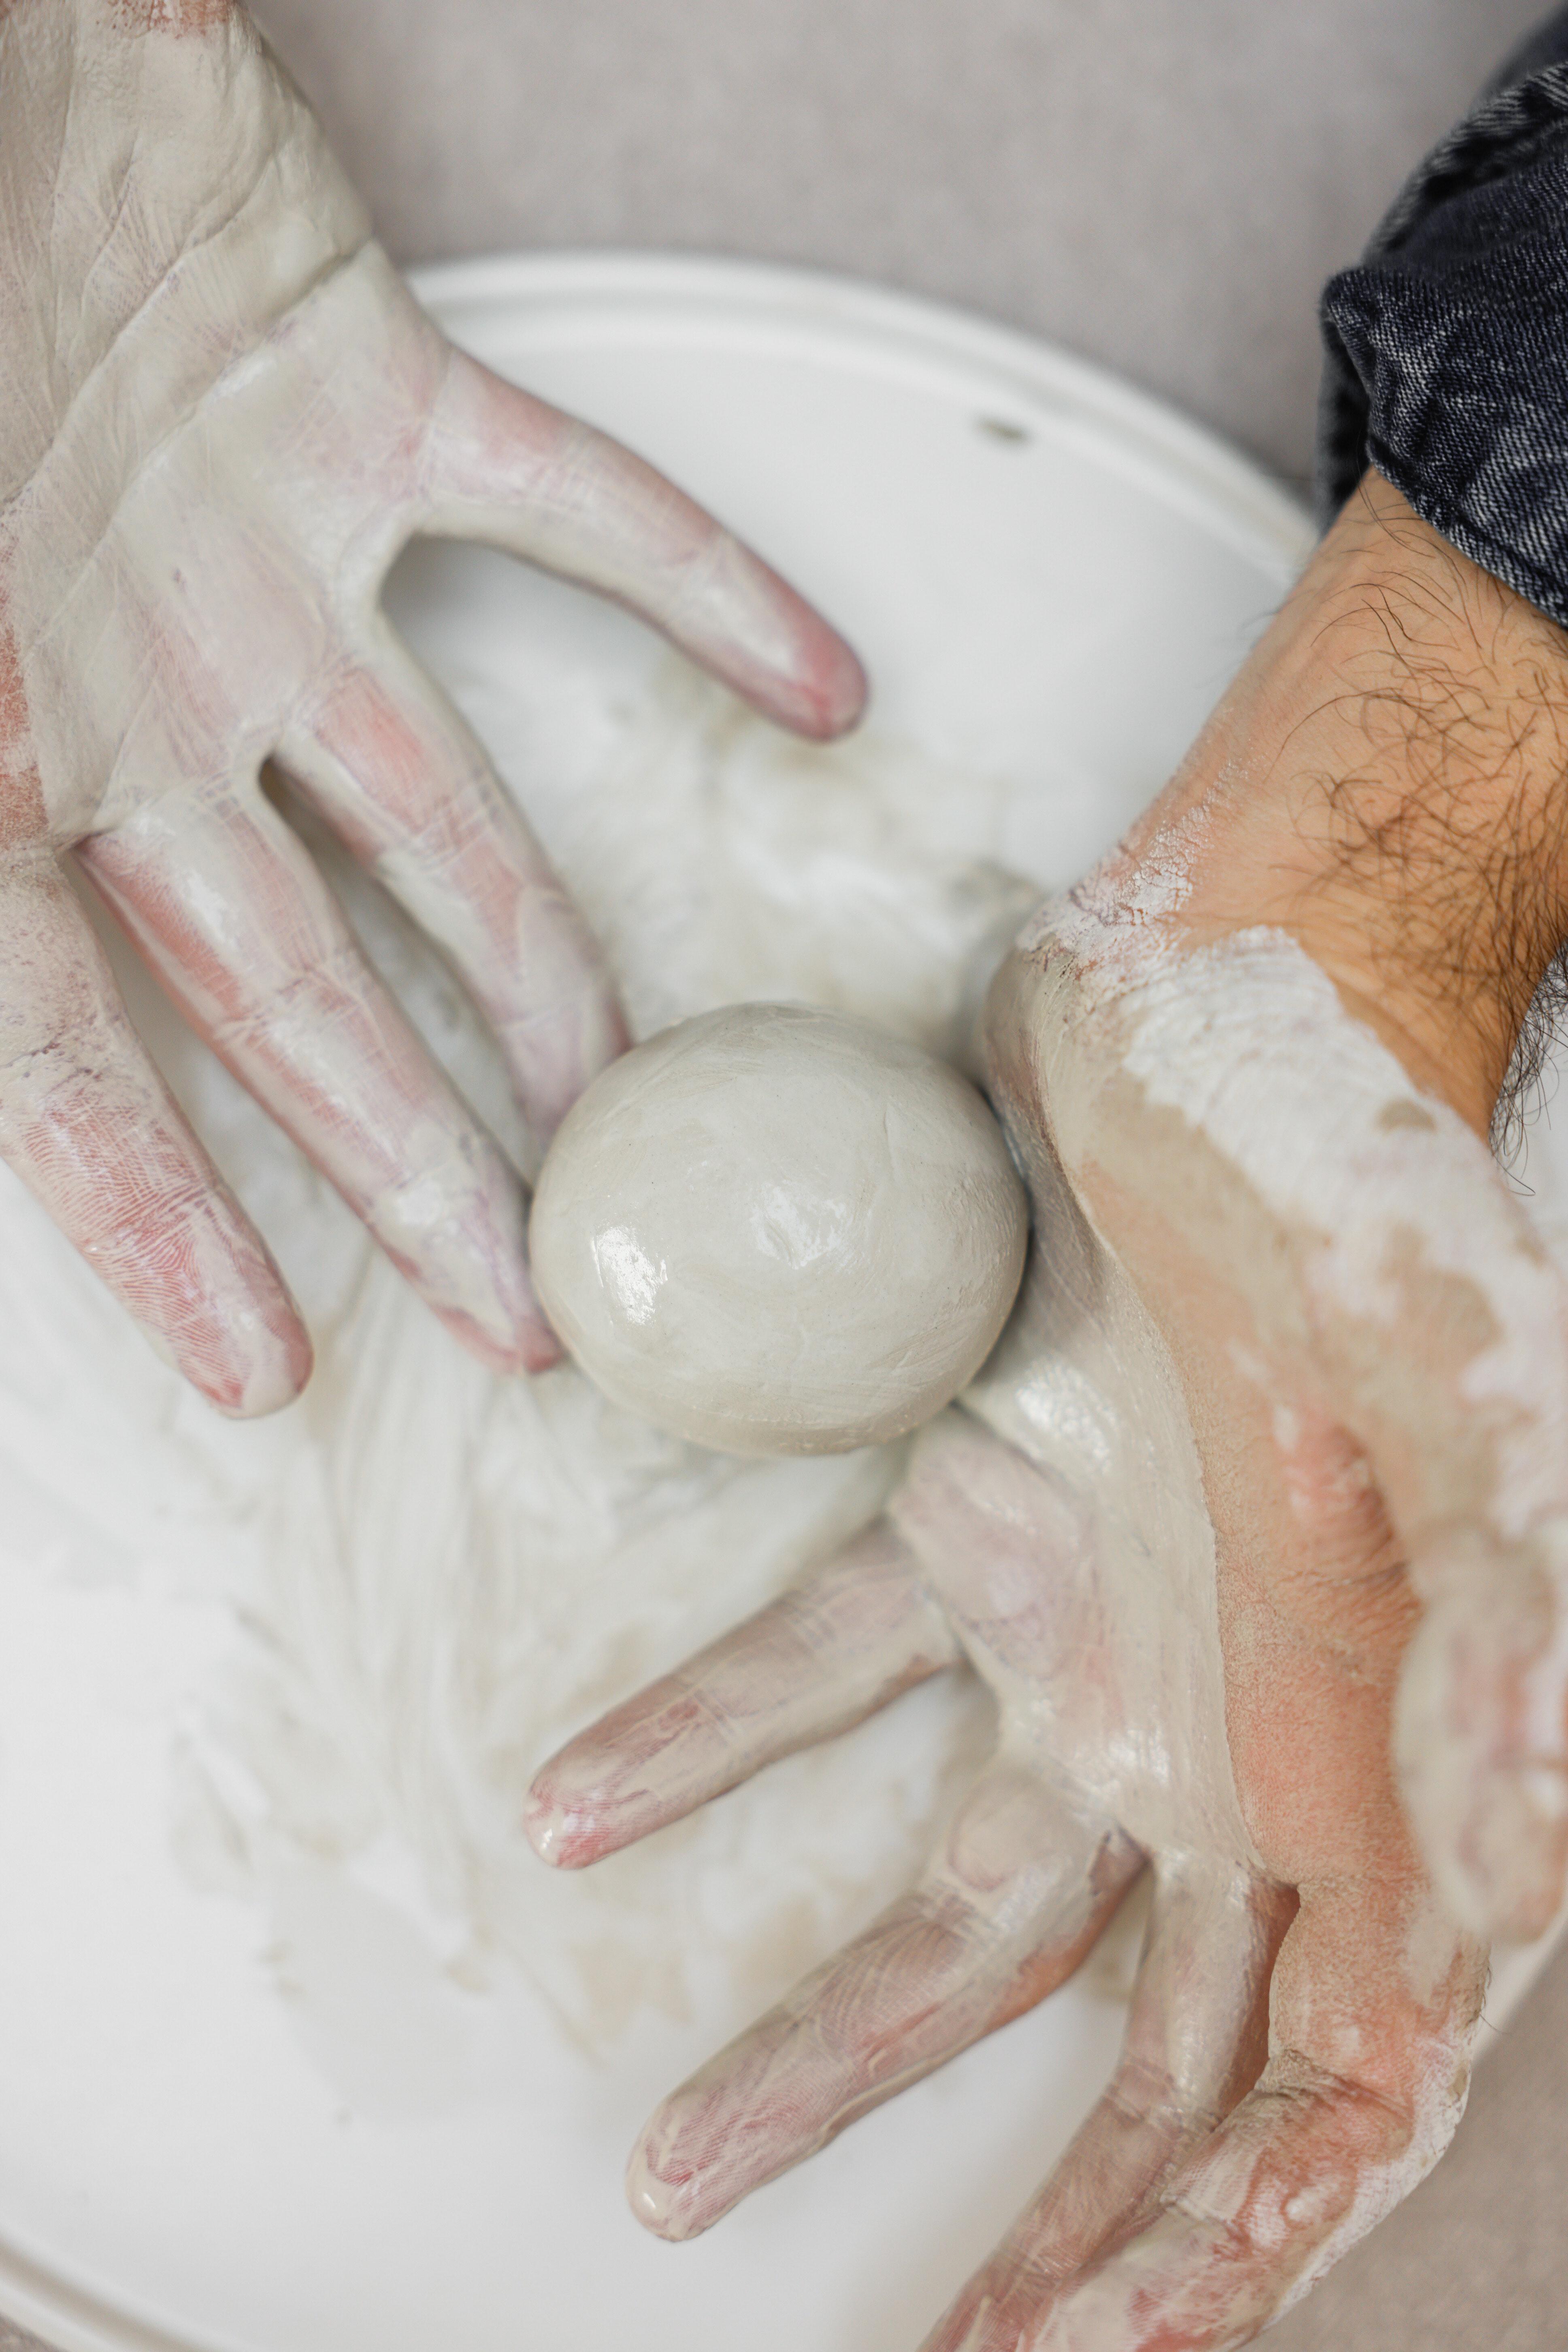 How do you make Oobleck with plain flour and water? 